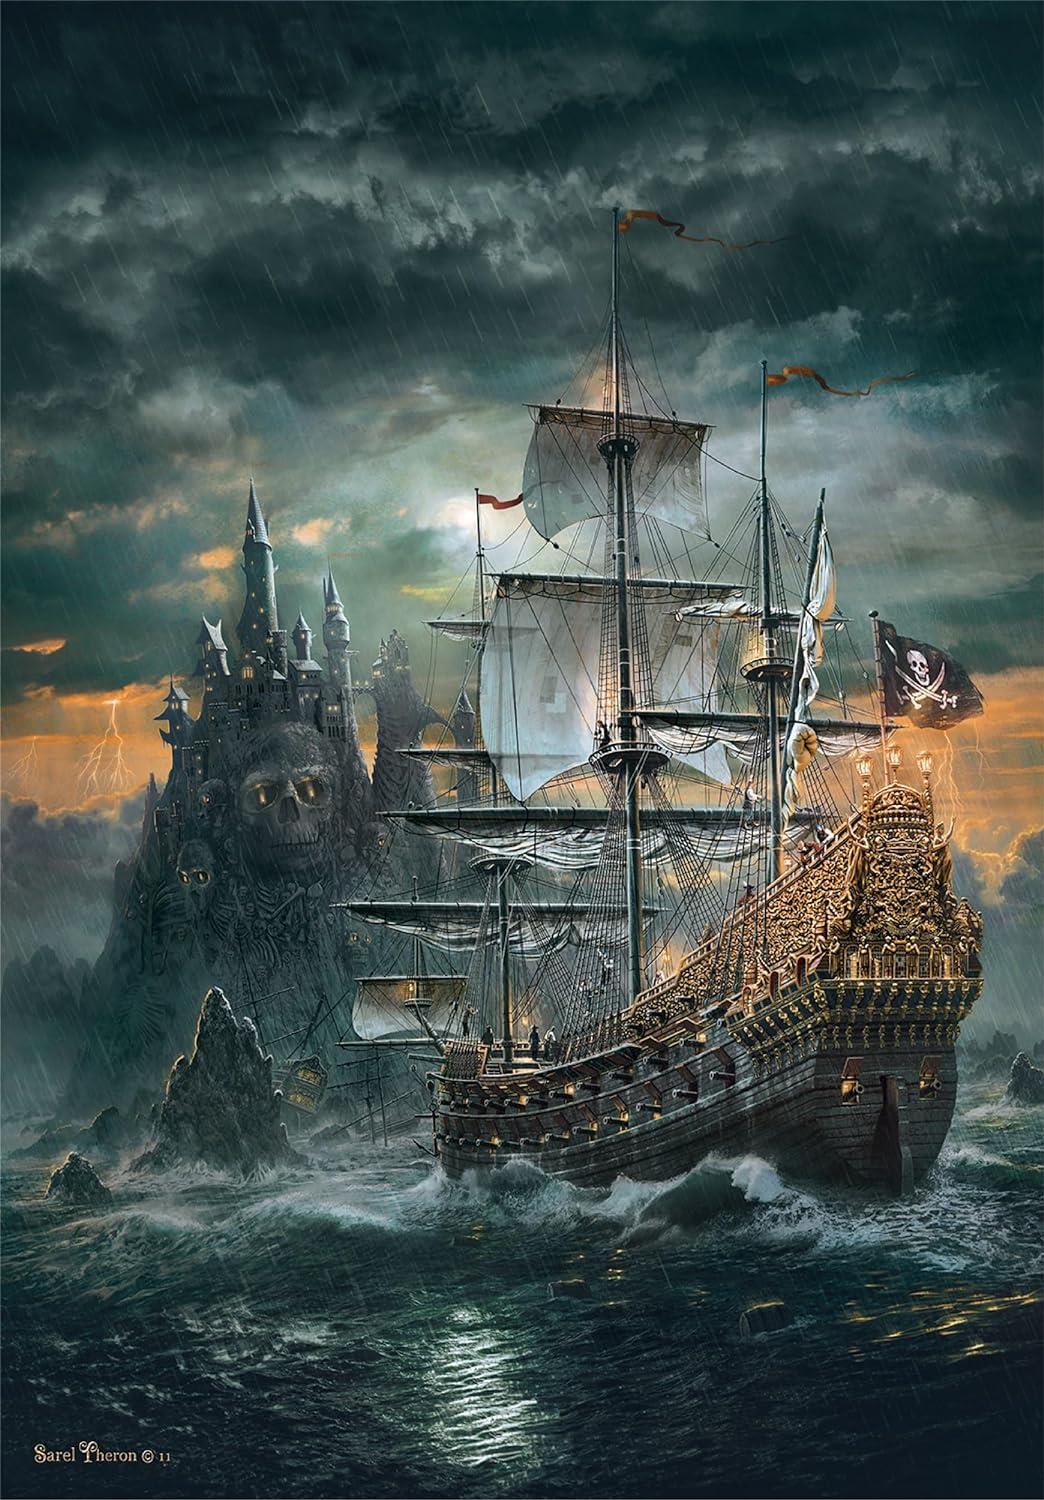 Clementoni The Pirate Ship Jigsaw Puzzle (1500 Pieces)